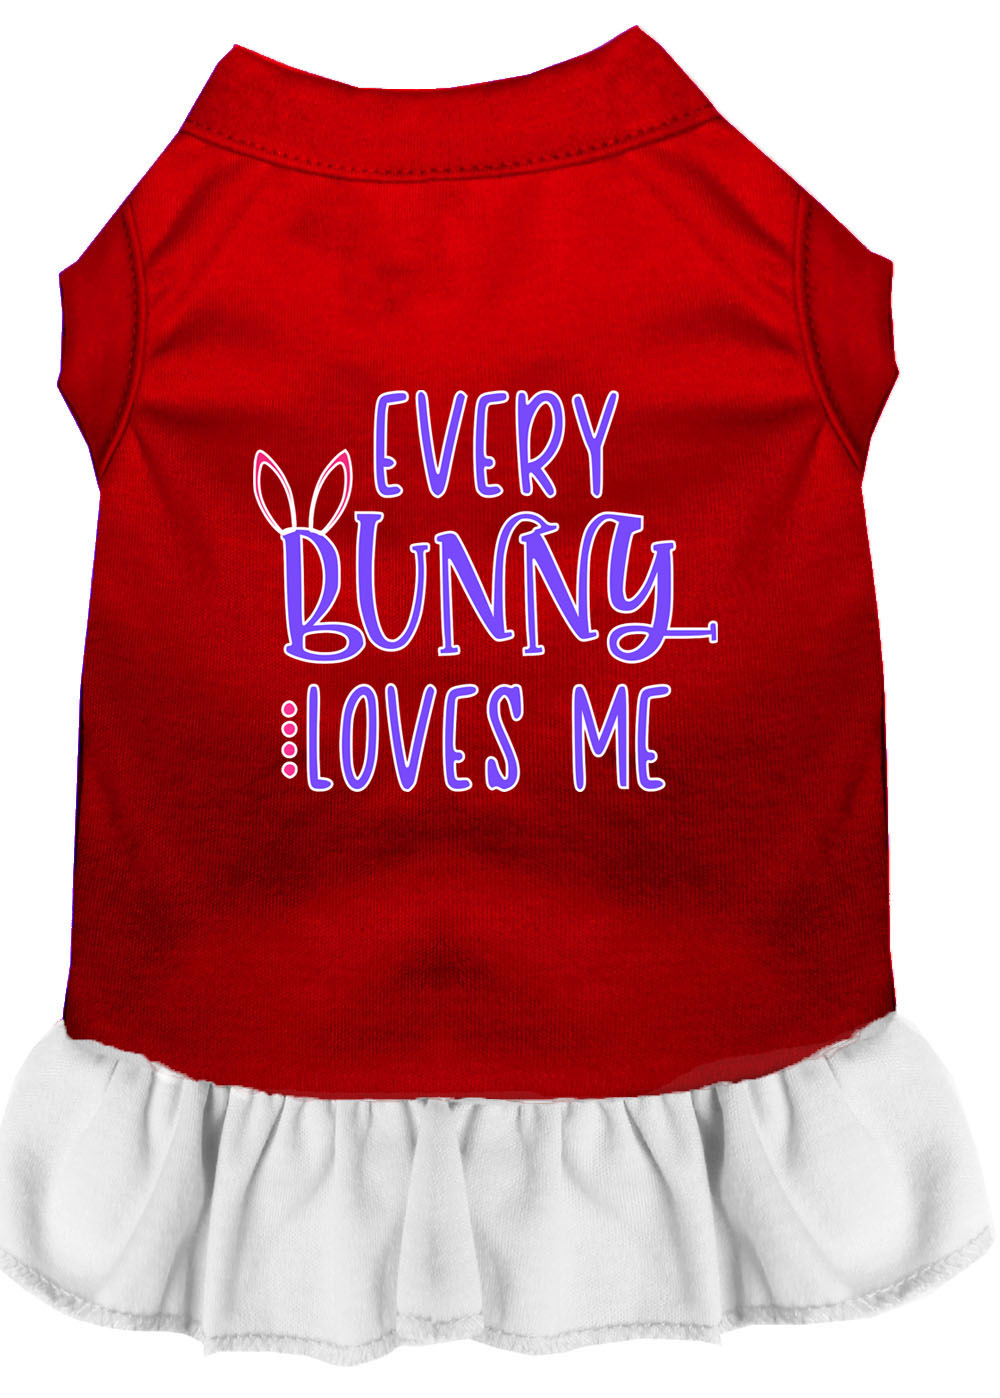 Every Bunny Loves me Screen Print Dog Dress Red with White XXXL